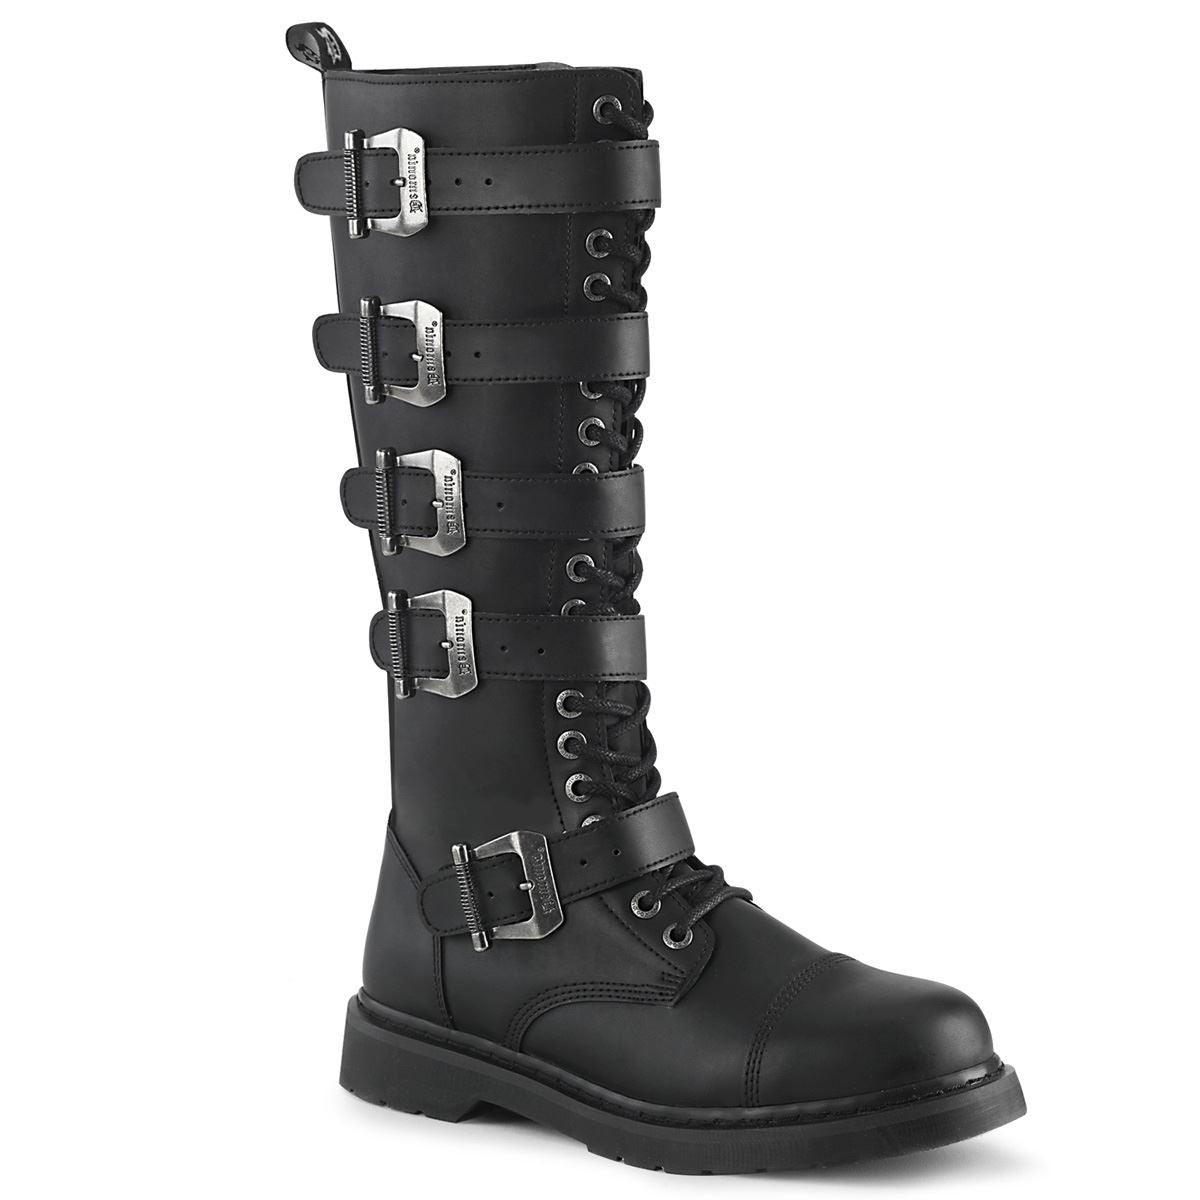 DEMONIA Men's Rock Knee High Boots Gothic EMO Black Combat Lace Up Buckle Straps - Knighthood Store